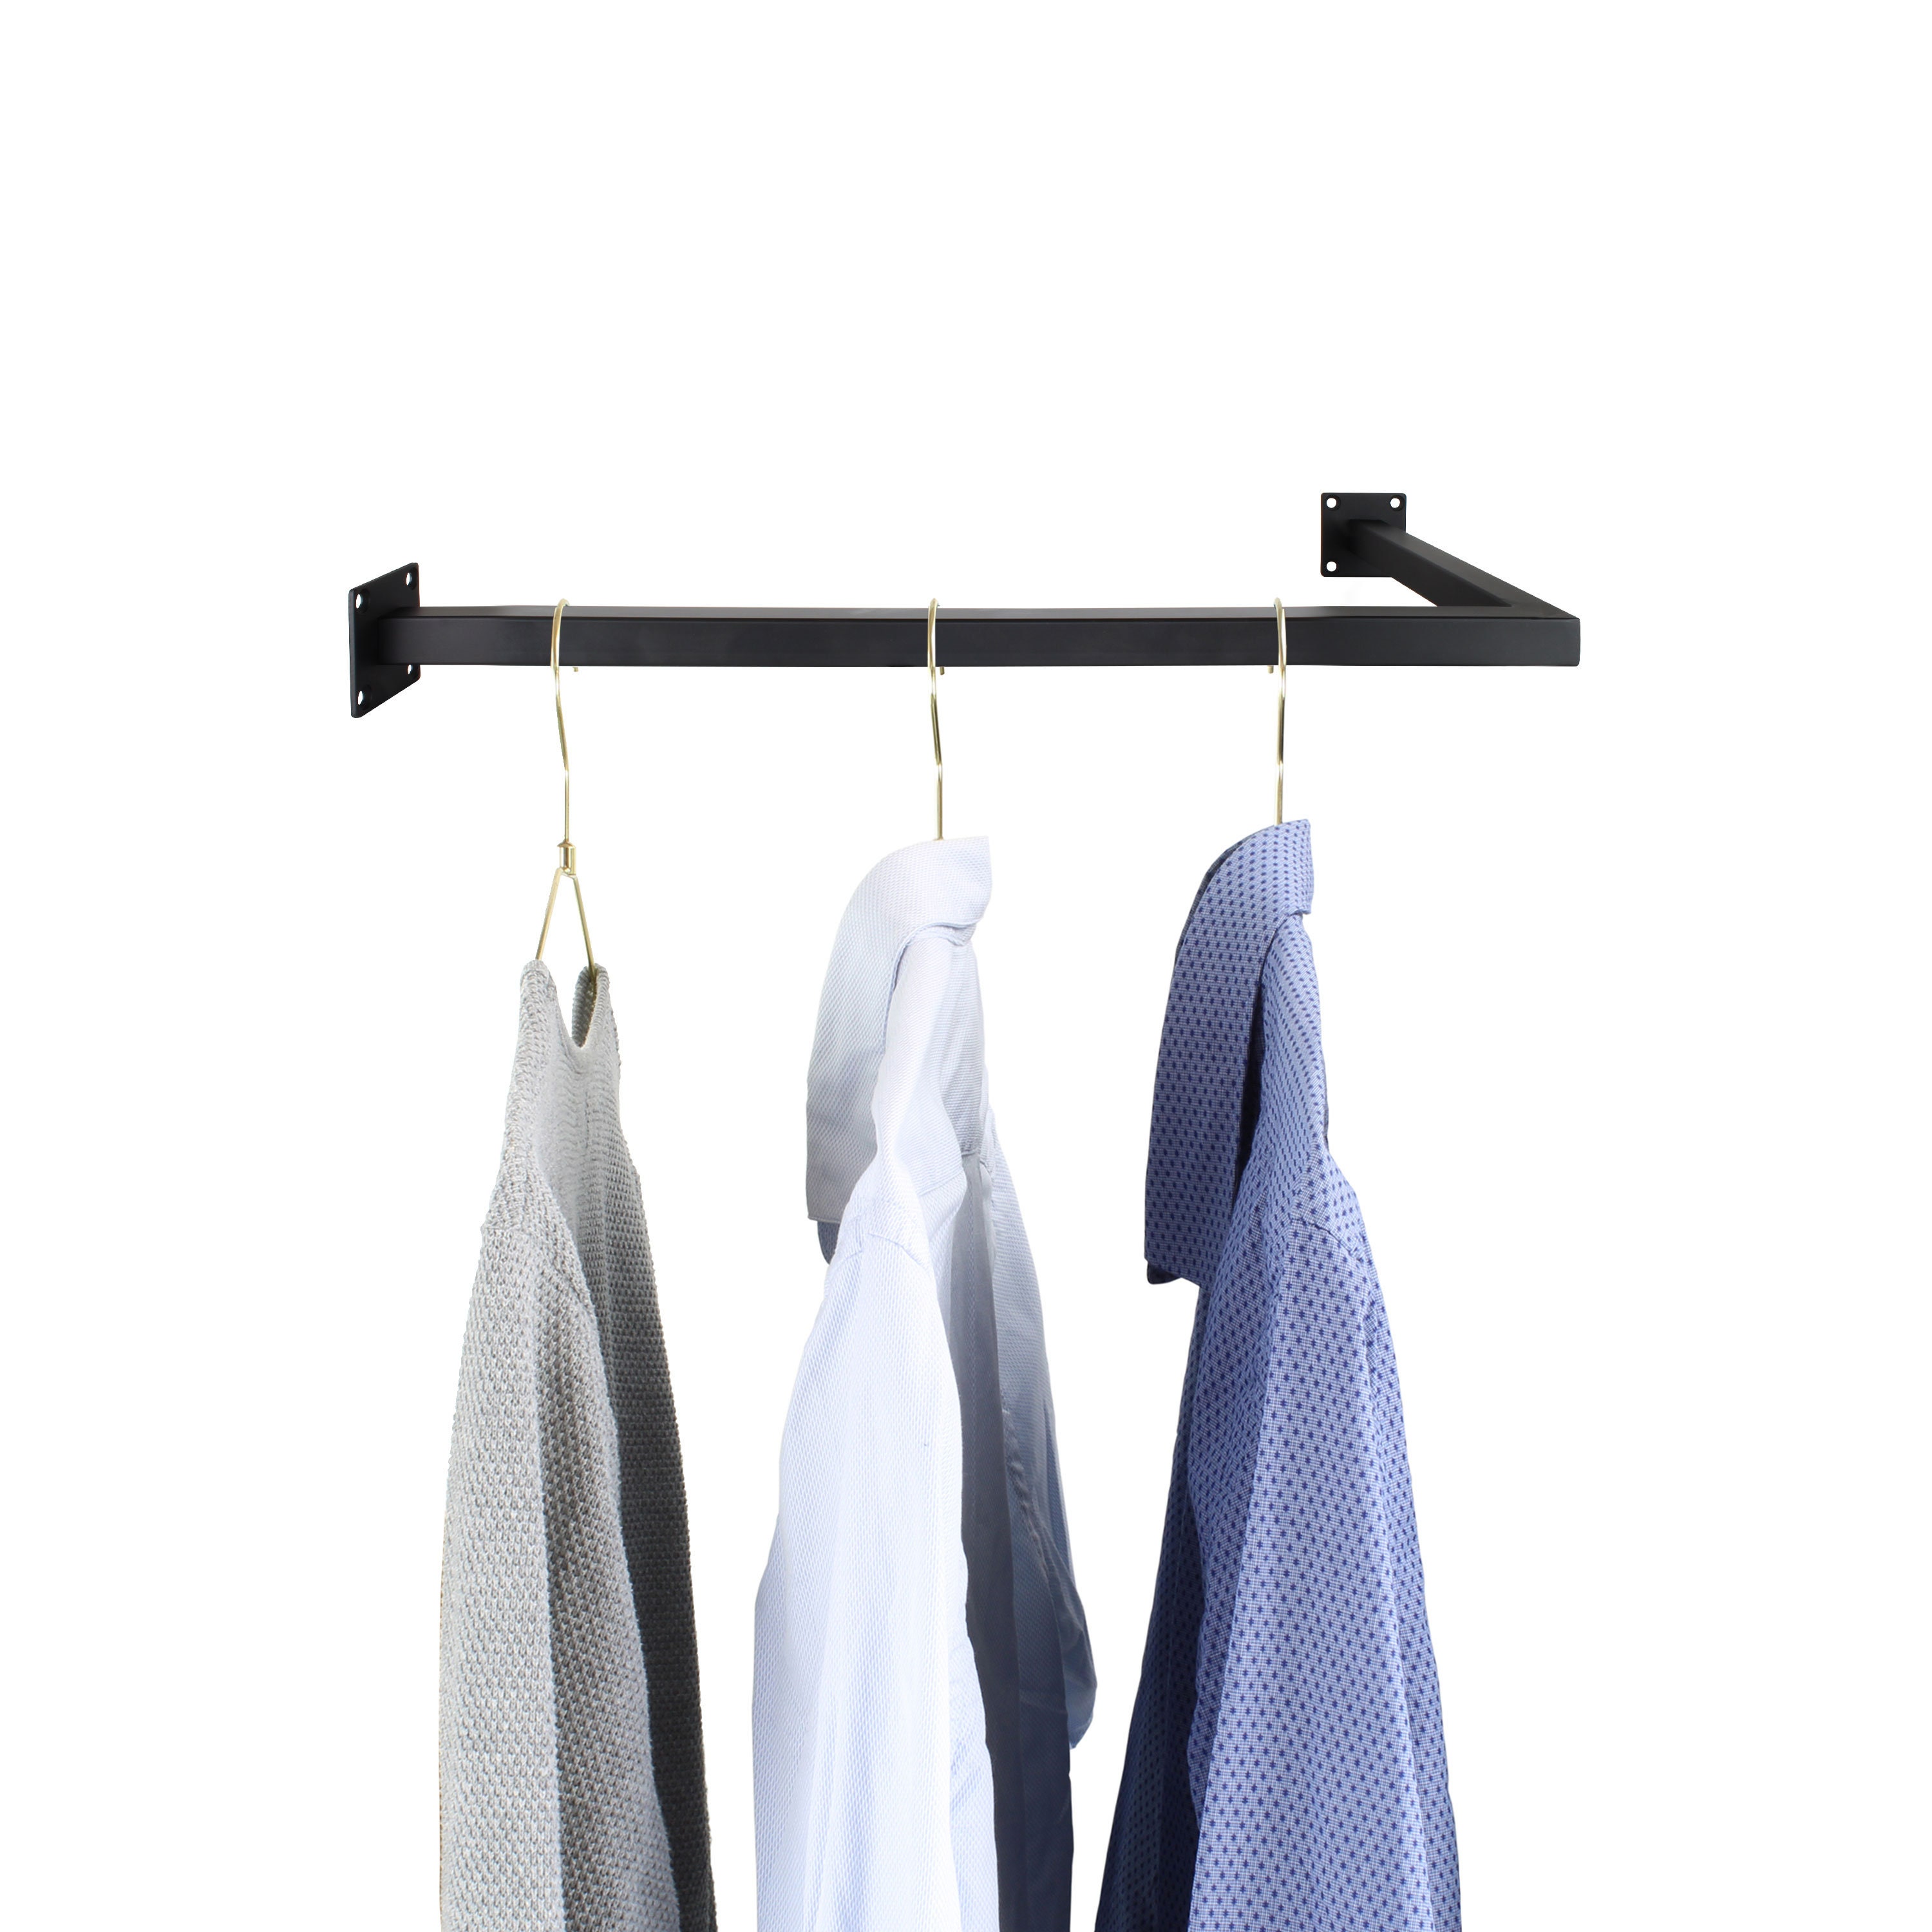 1x Clothes Rail OVERECK Wardrobe Holder L-shape for Clothes Hangers Wall  Mounted in the Bathroom Hallway Kitchen Cabinet Powder Coated and Rustproof  -  Singapore